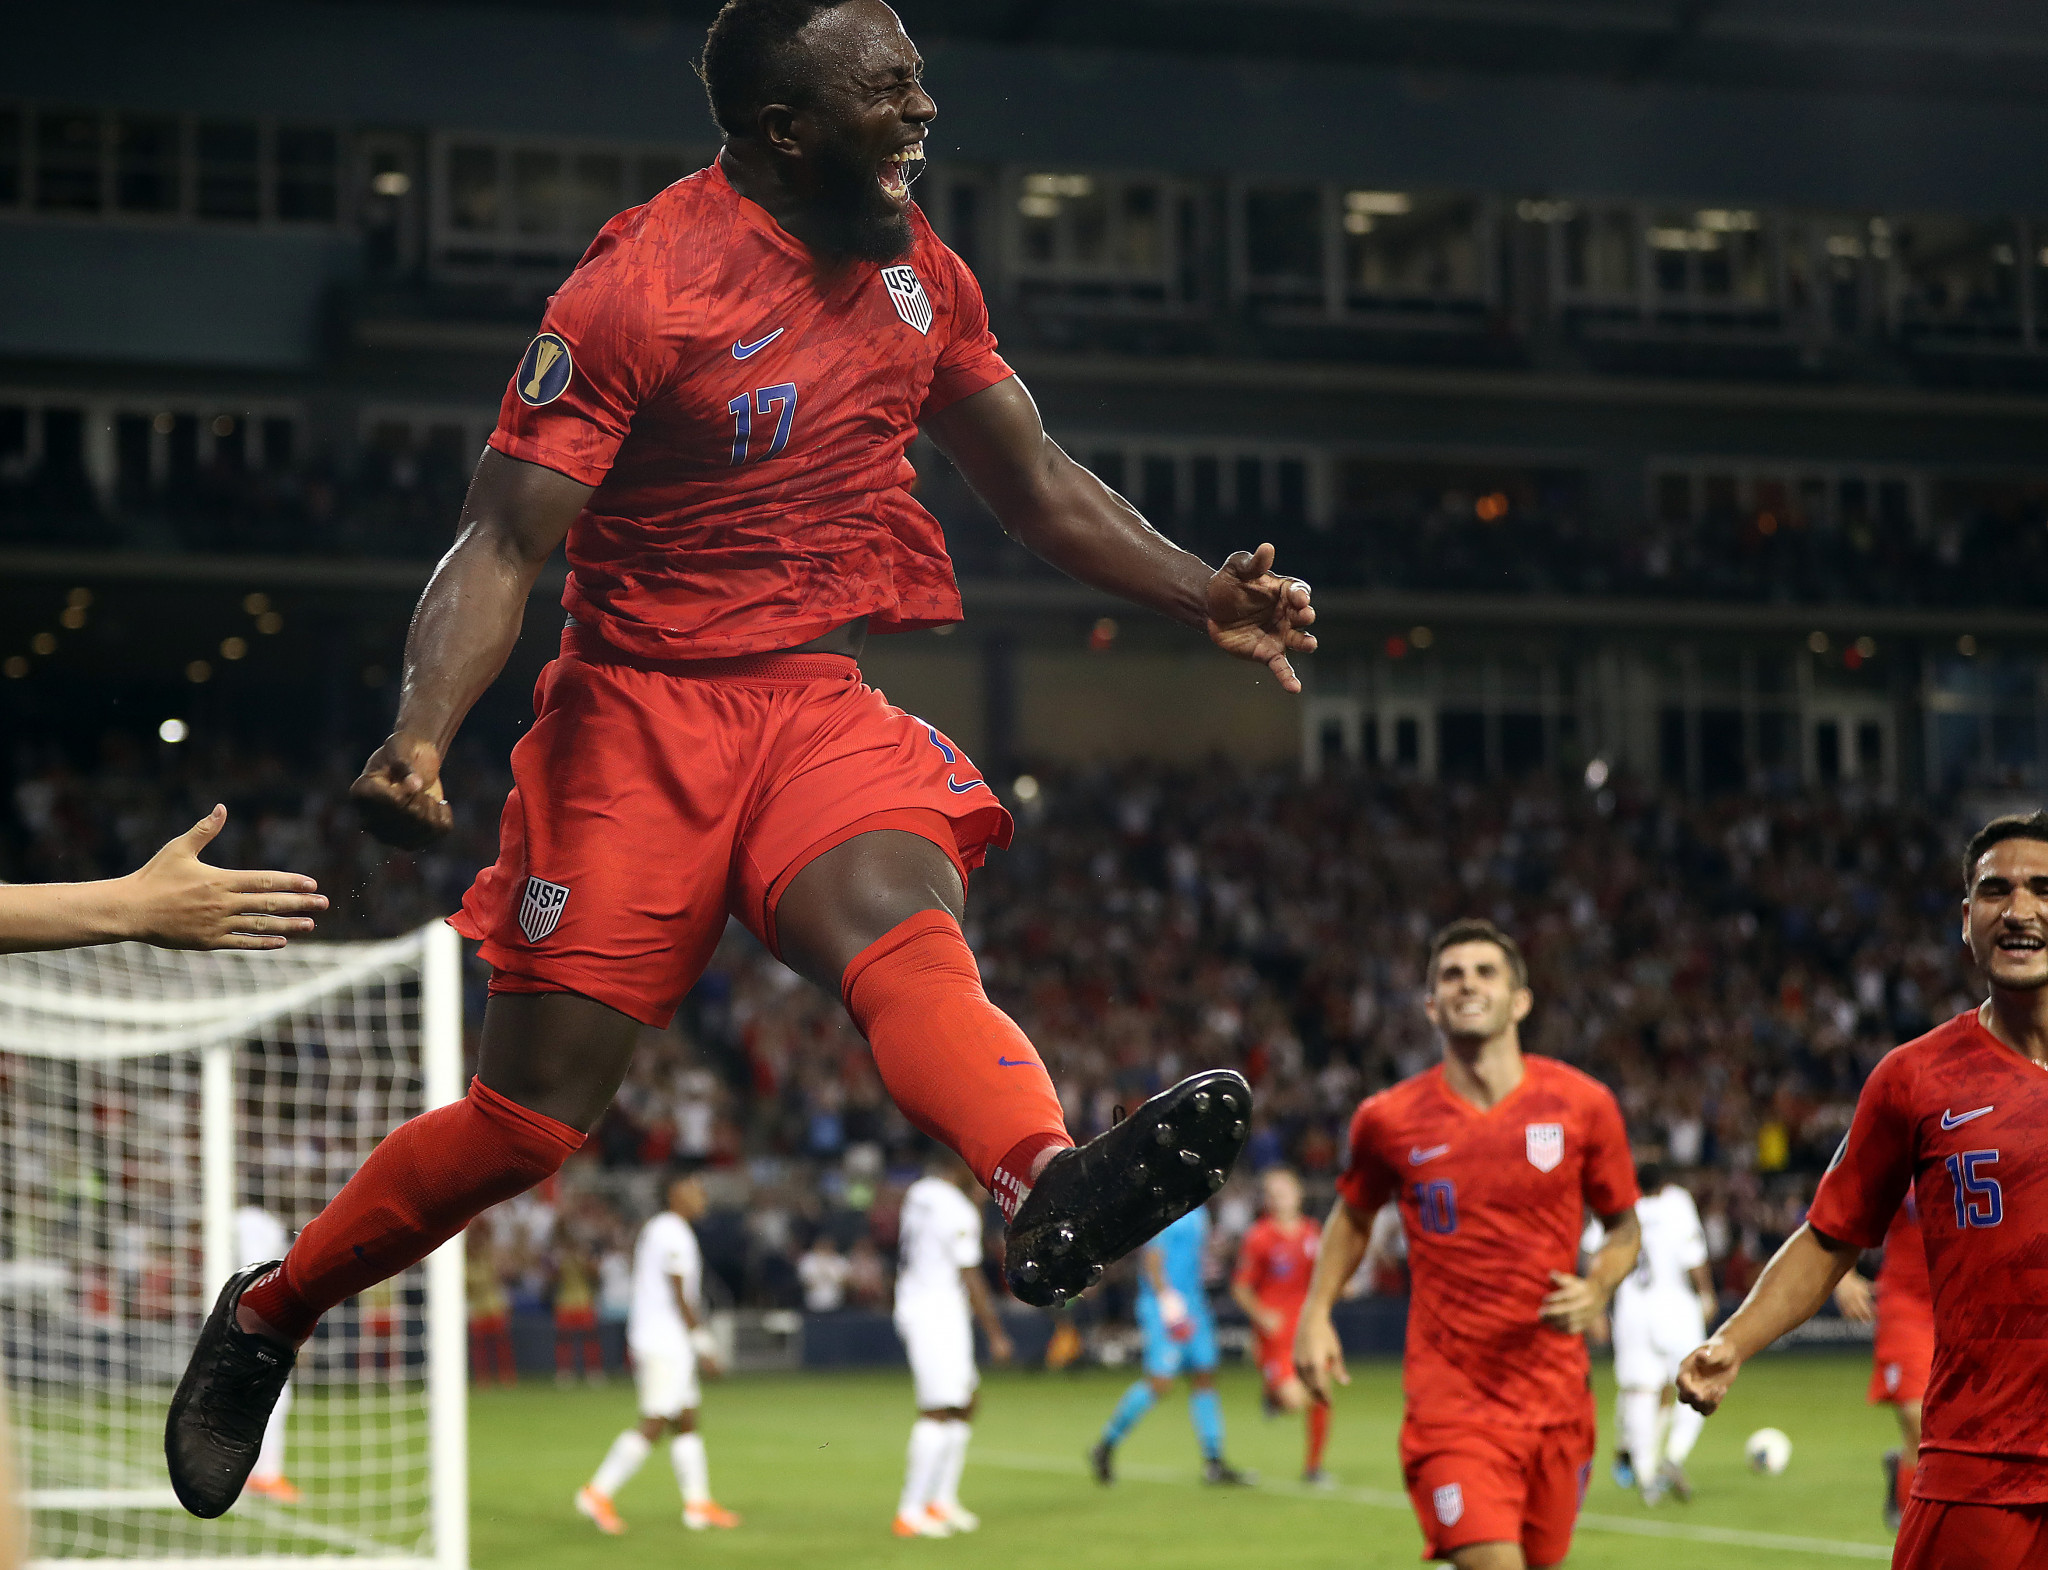 United States beat Panama to top Group D at CONCACAF Gold Cup